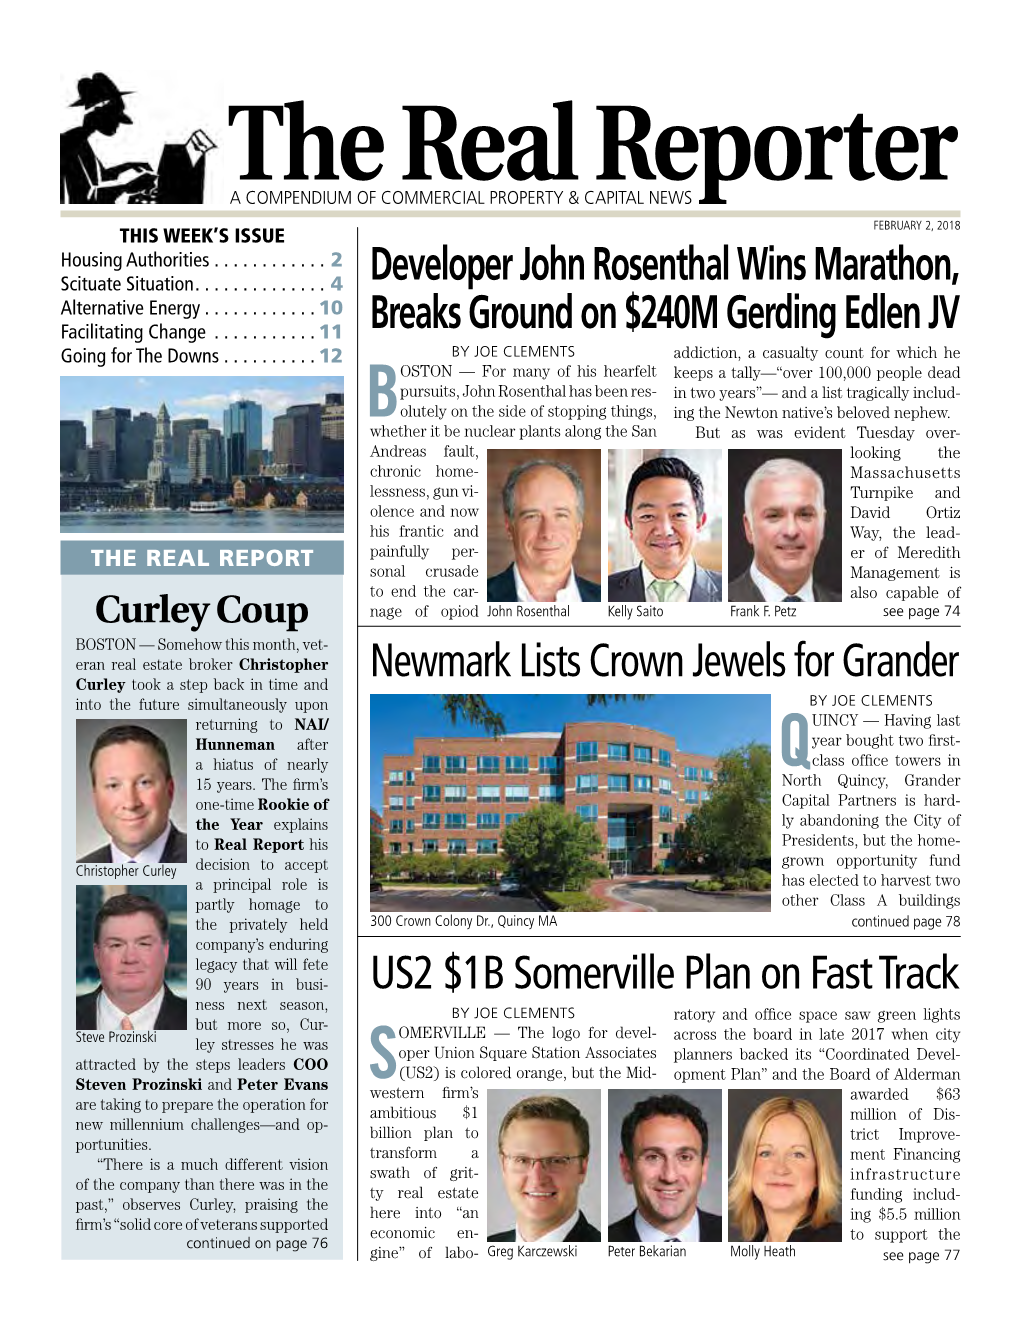 The Real Reporter a COMPENDIUM of COMMERCIAL PROPERTY & CAPITAL NEWS FEBRUARY 2, 2018 THIS WEEK’S ISSUE Housing Authorities